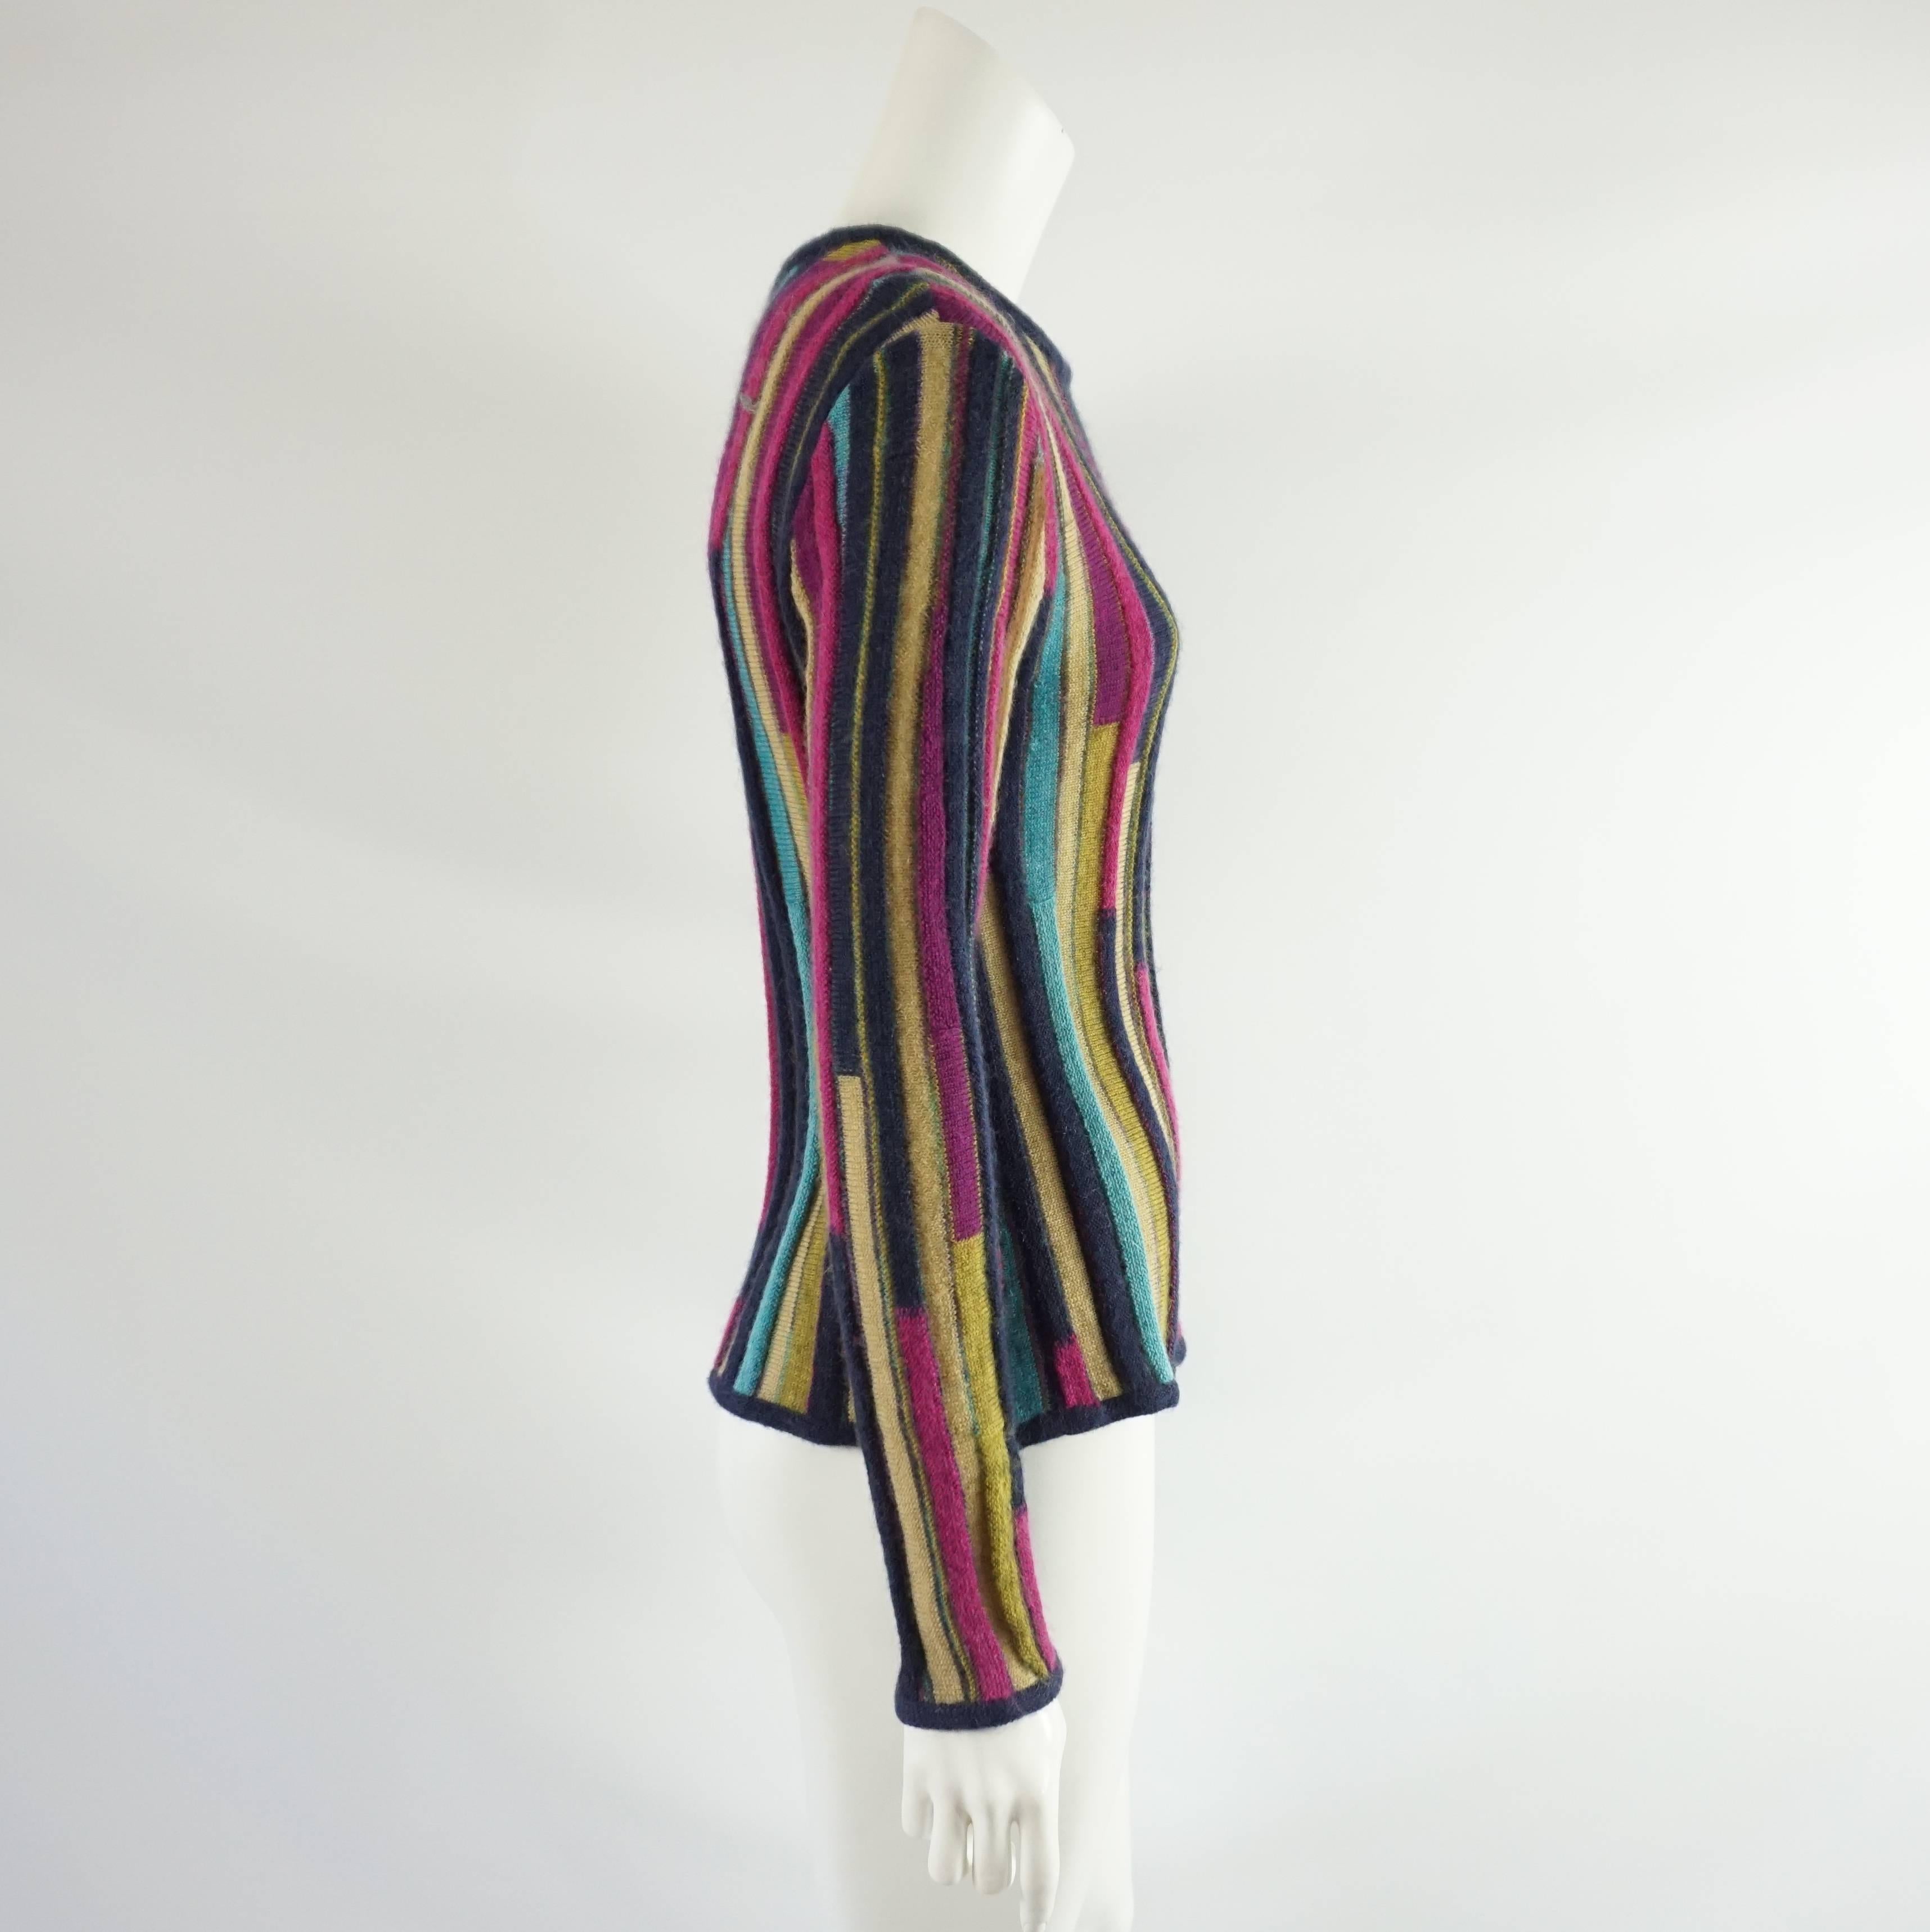 This Missoni mohair sweater is long sleeved with vertical stripes in many colors. Some of the stripes have a ribbed feeling. This sweater is in excellent condition. Size medium.

Measurements
Shoulder to Shoulder: 17.25